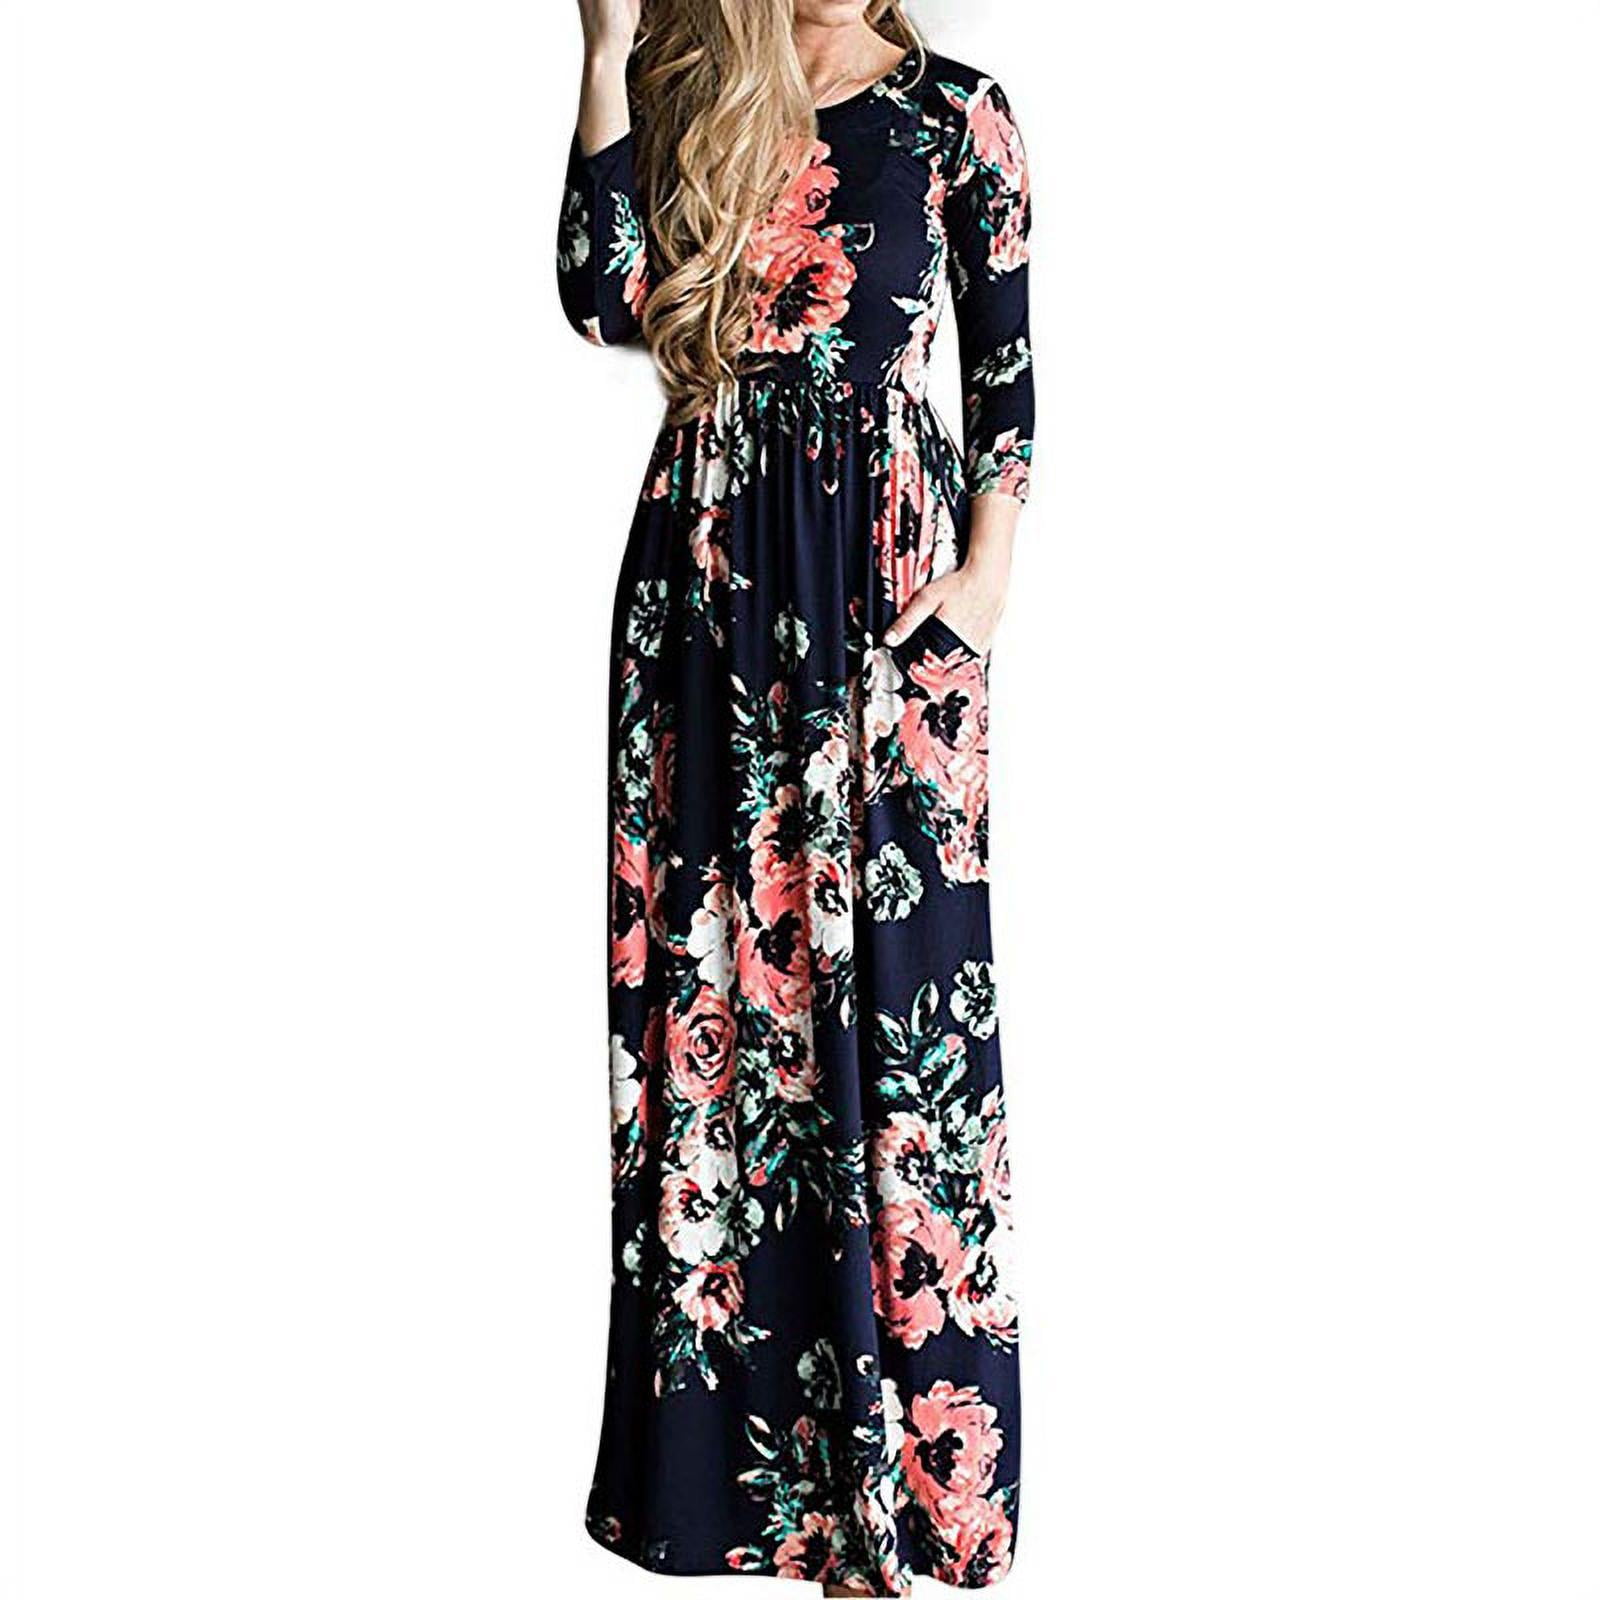 Women's 3/4 Sleeve Floral Dress Casual Stretch Maxi Long Dresses ...